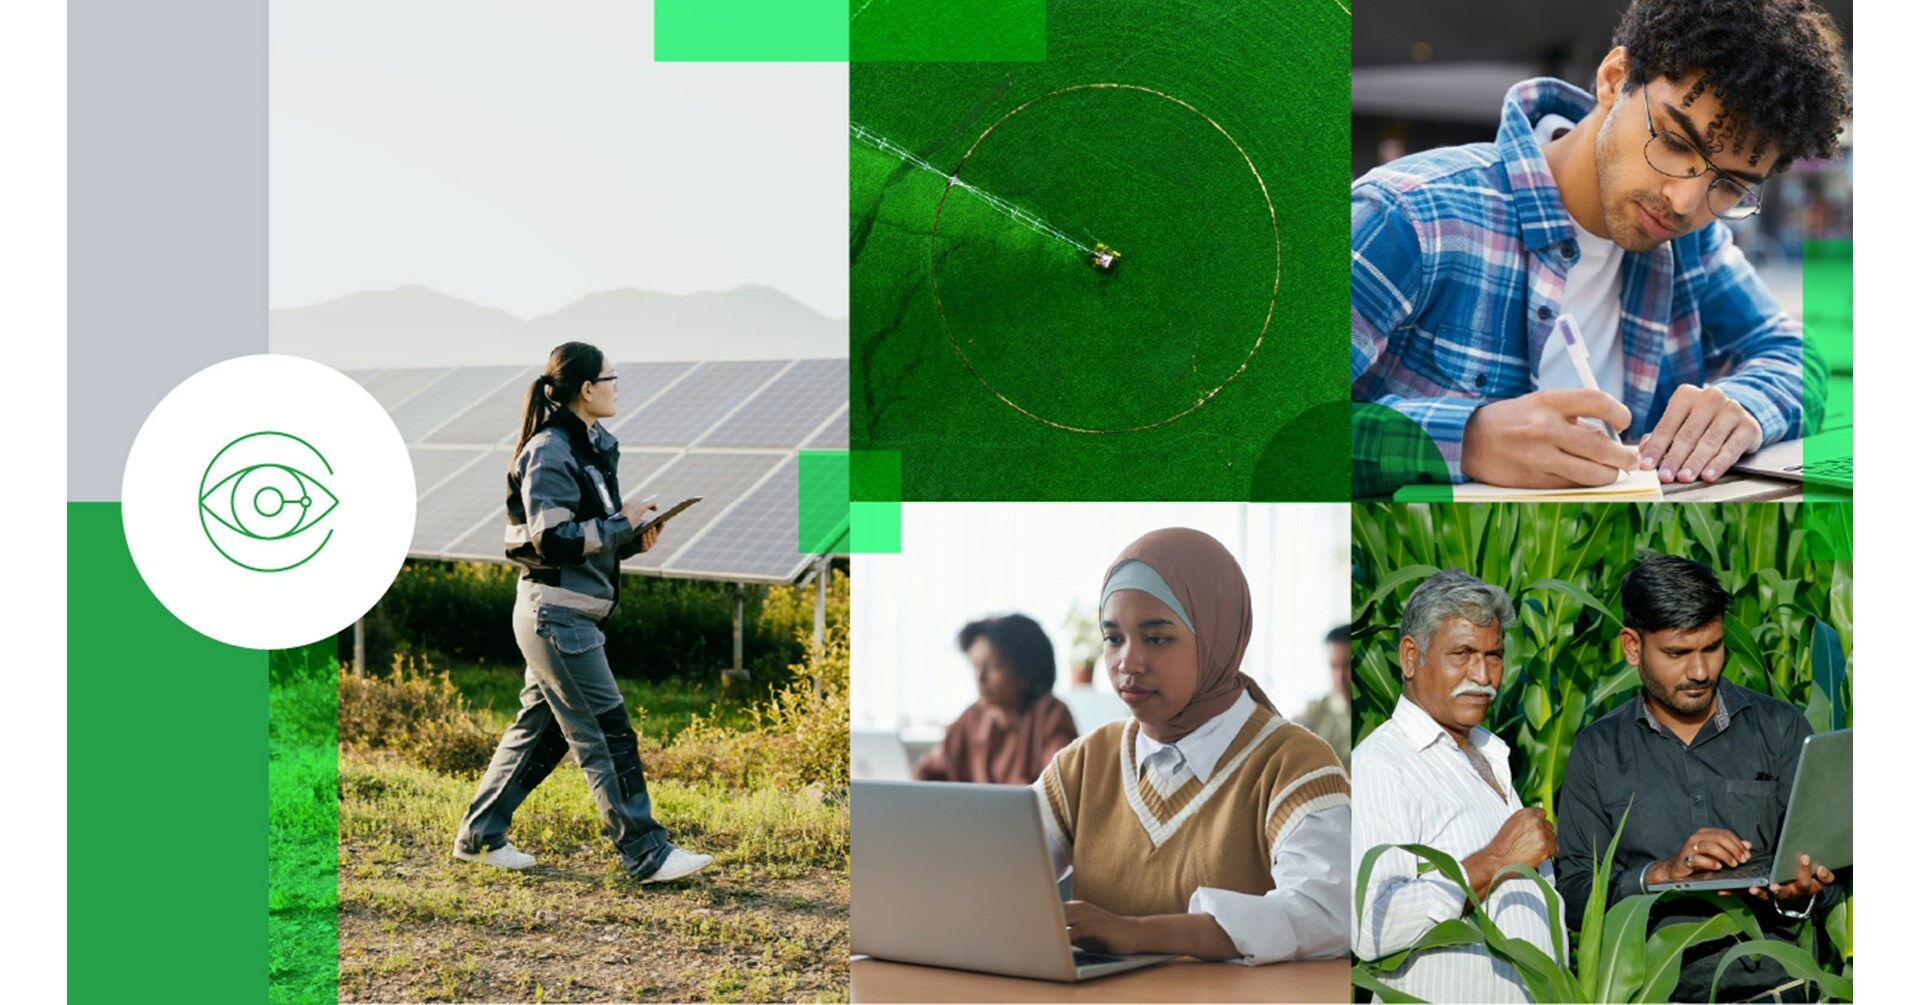 IBM Furthers Commitment to Climate Action Through New Sustainability Projects and Free Training in Green and Technology Skills for Vulnerable Communities